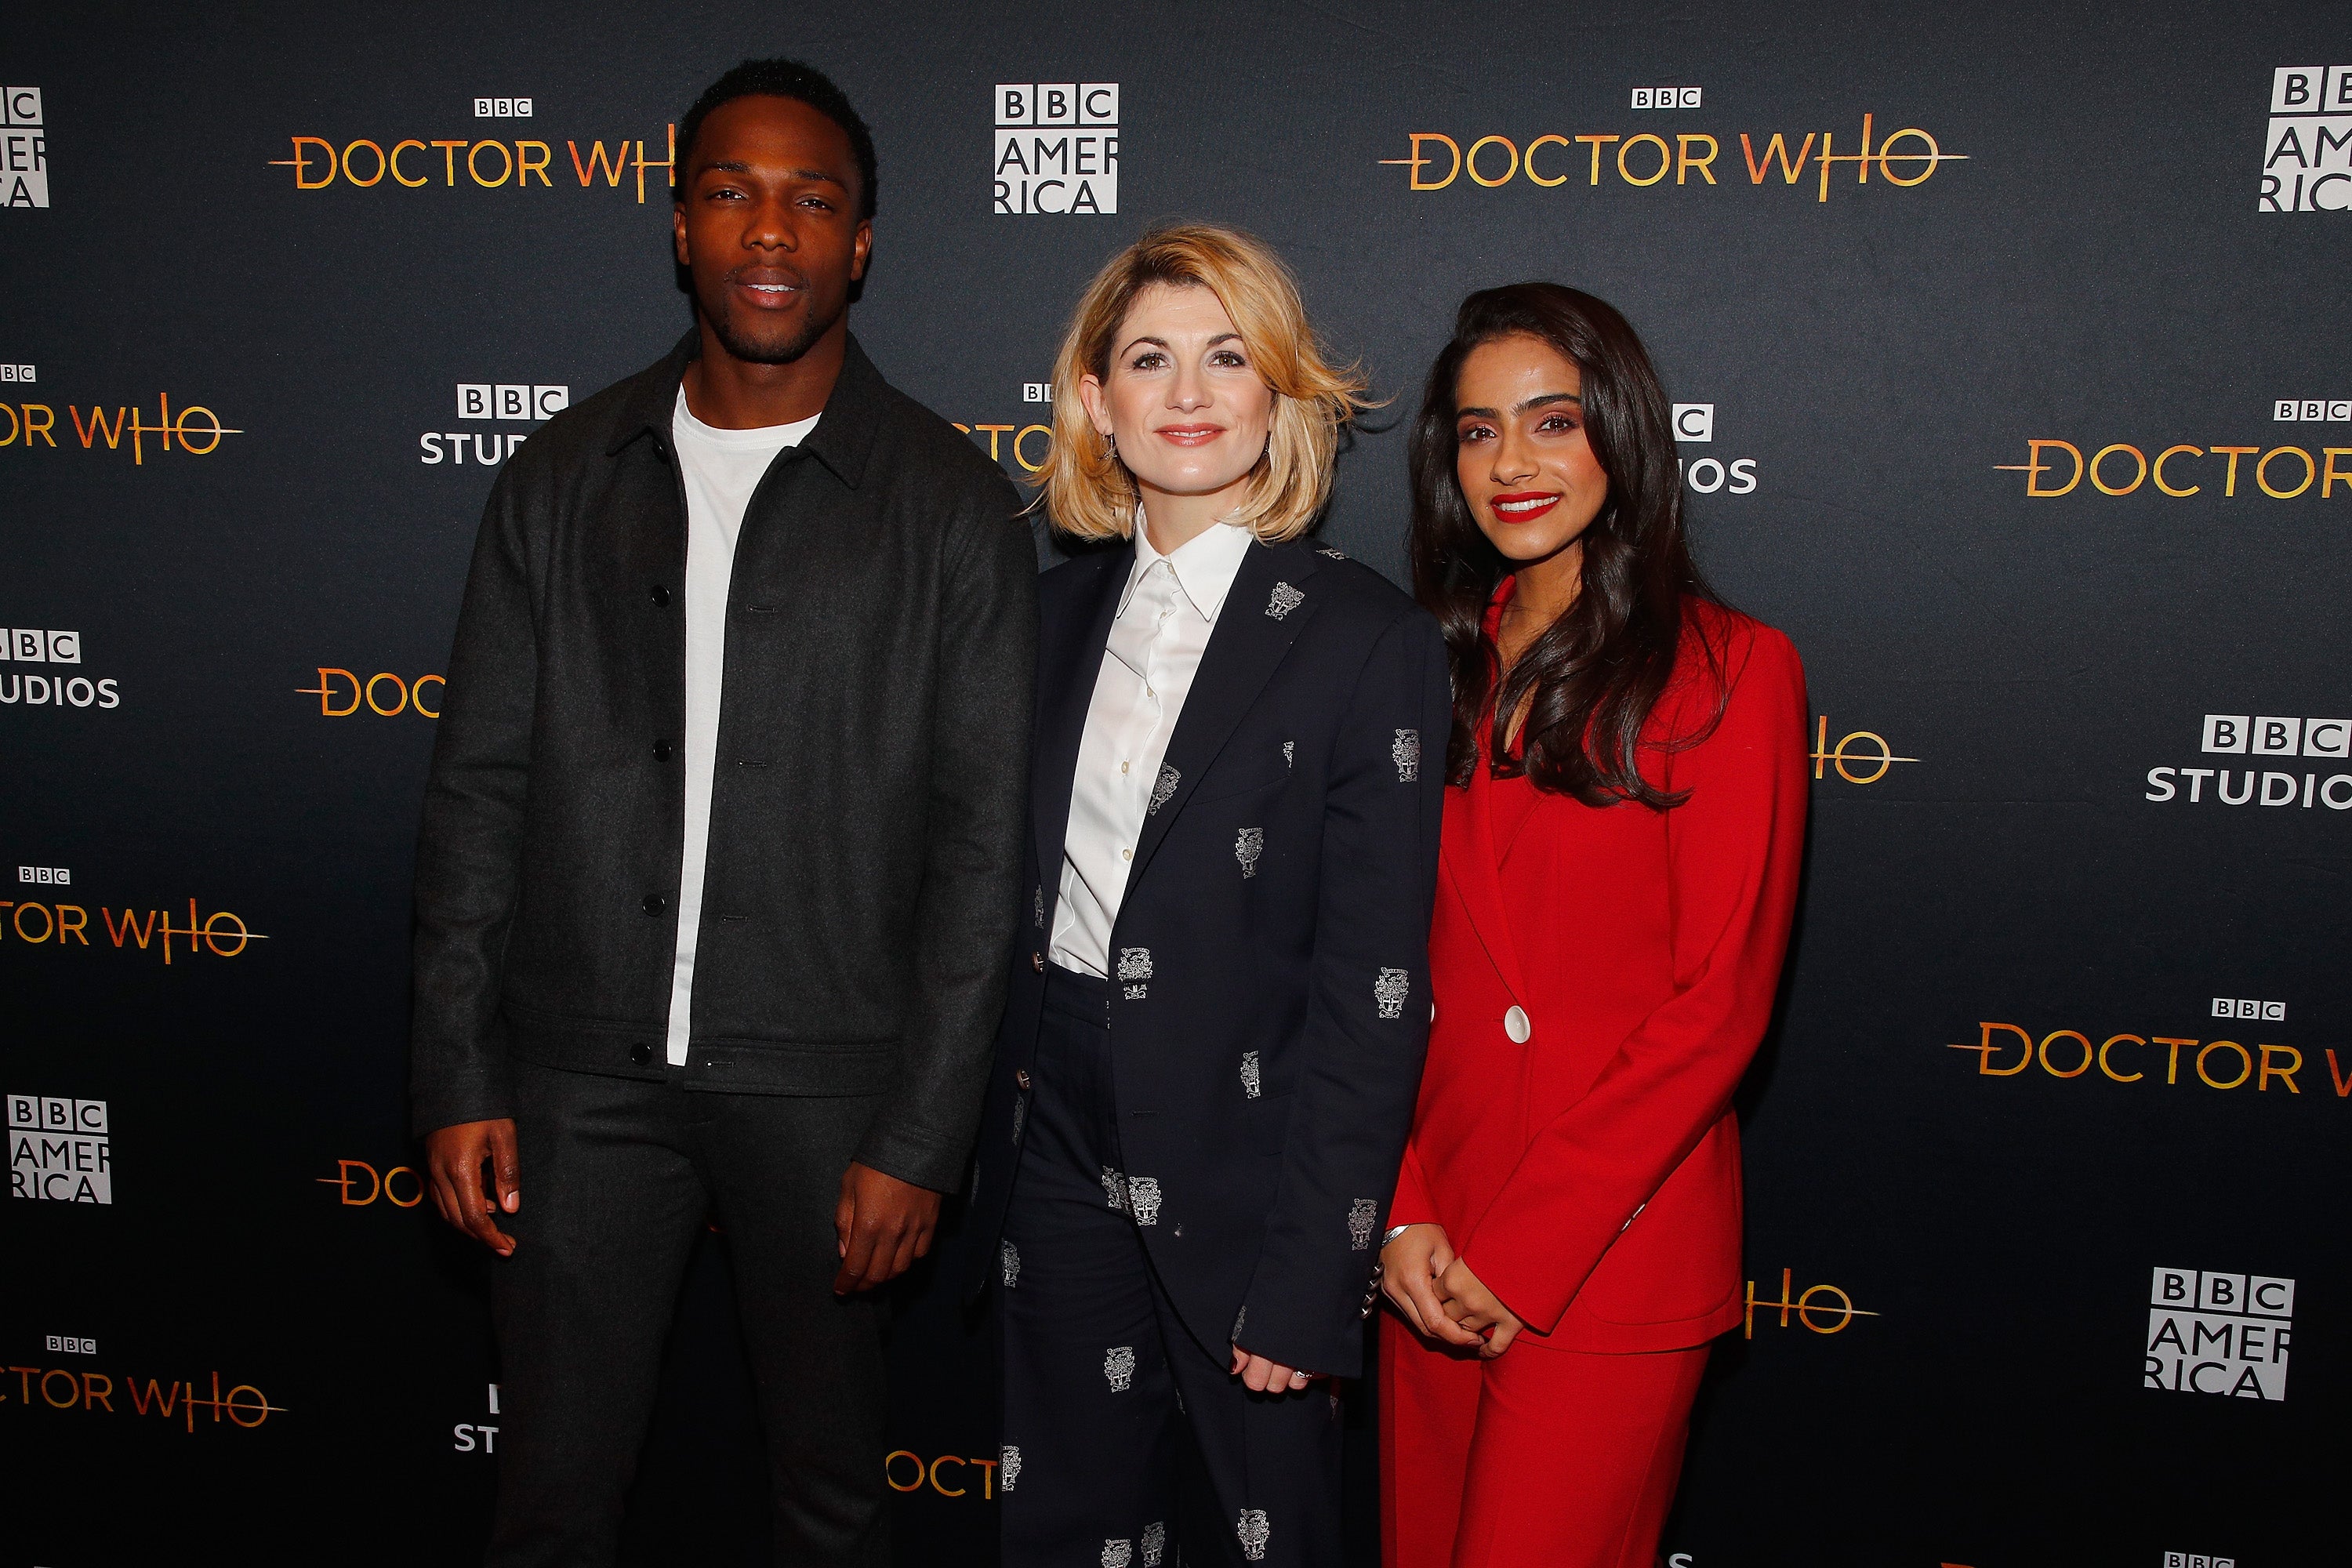 Whittaker with ‘Doctor Who’ co-stars Tosin Cole and Mandip Gill